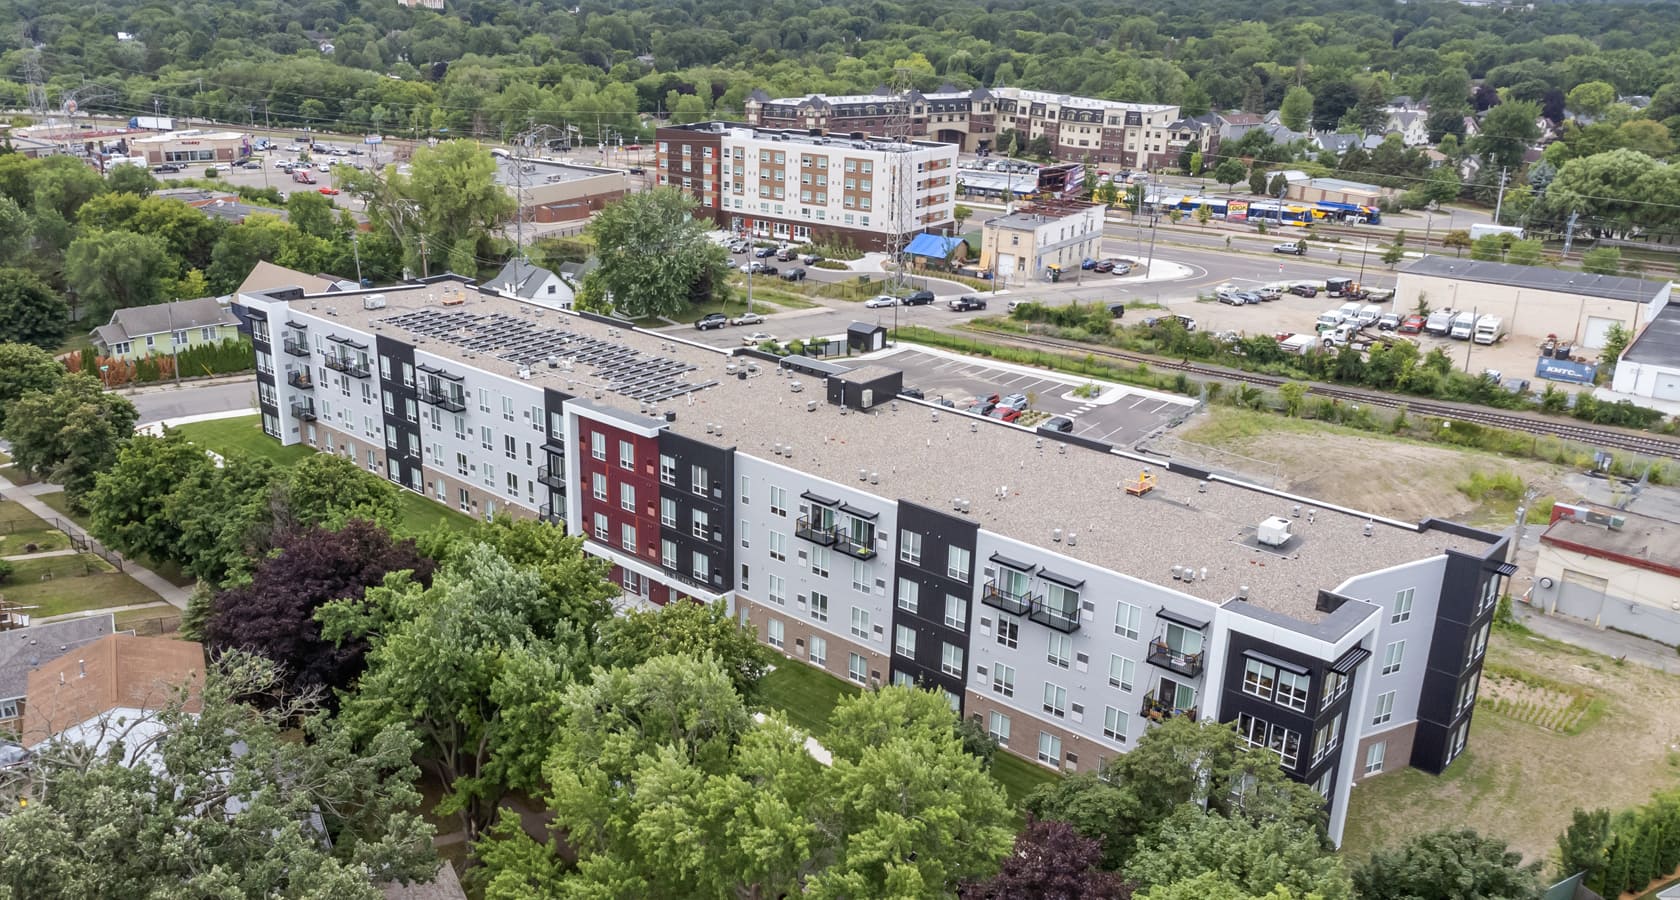 The Hillock  Affordable Housing for Seniors 55+ in Minneapolis